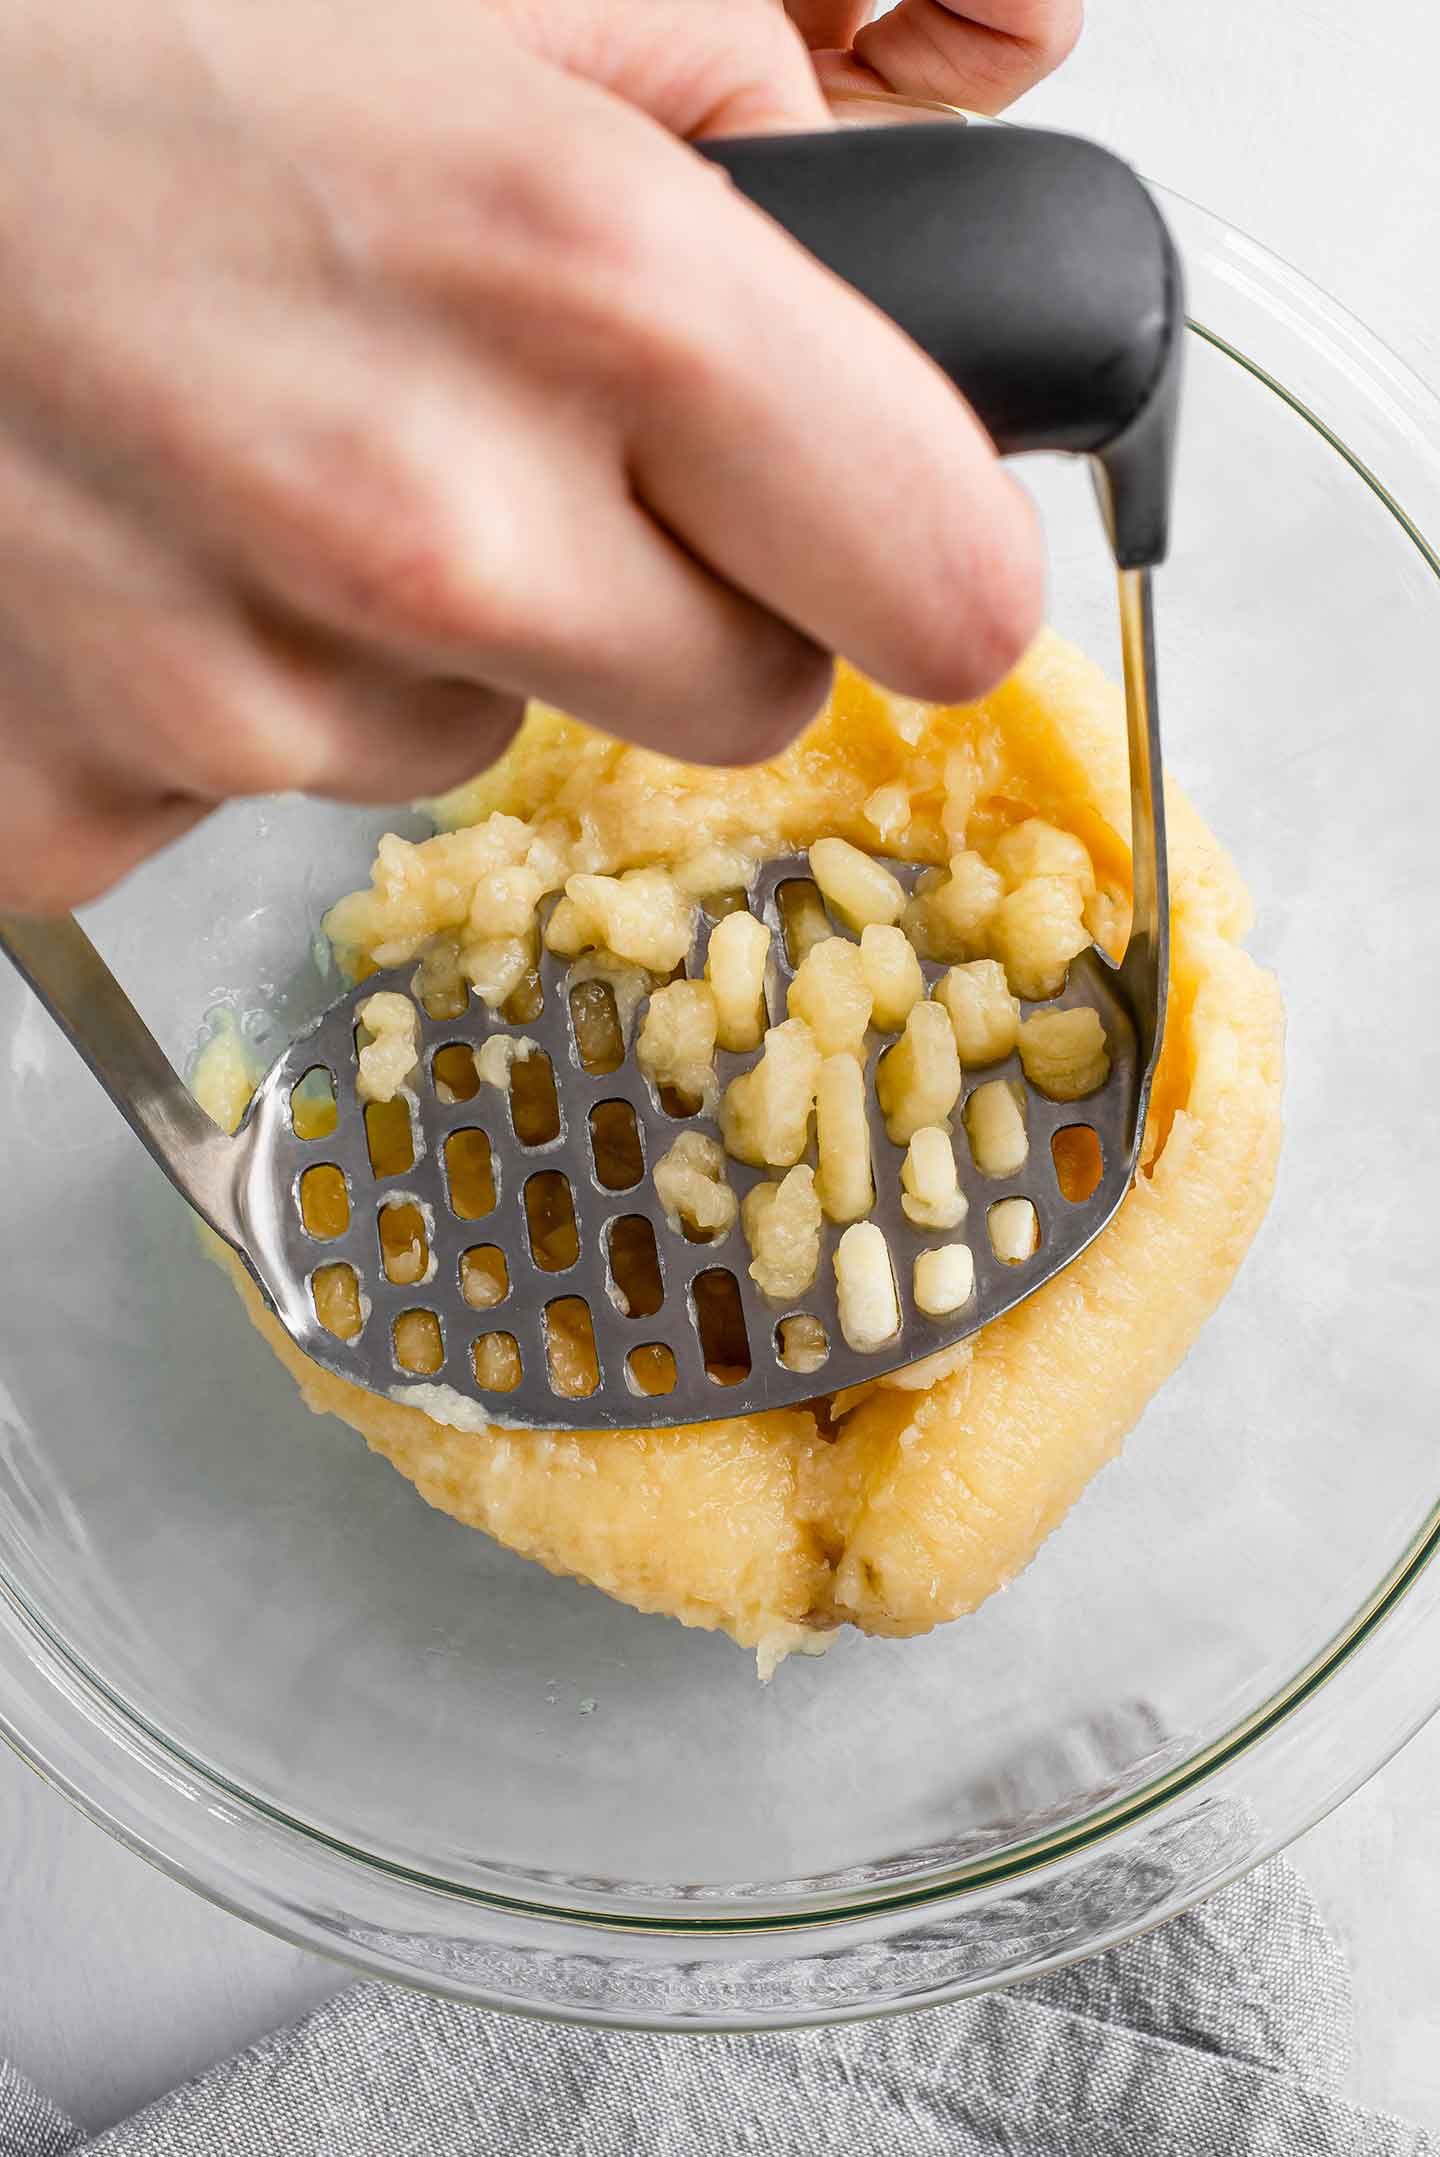 Top down view of a hand using a masher to mash ripe bananas in a bowl.